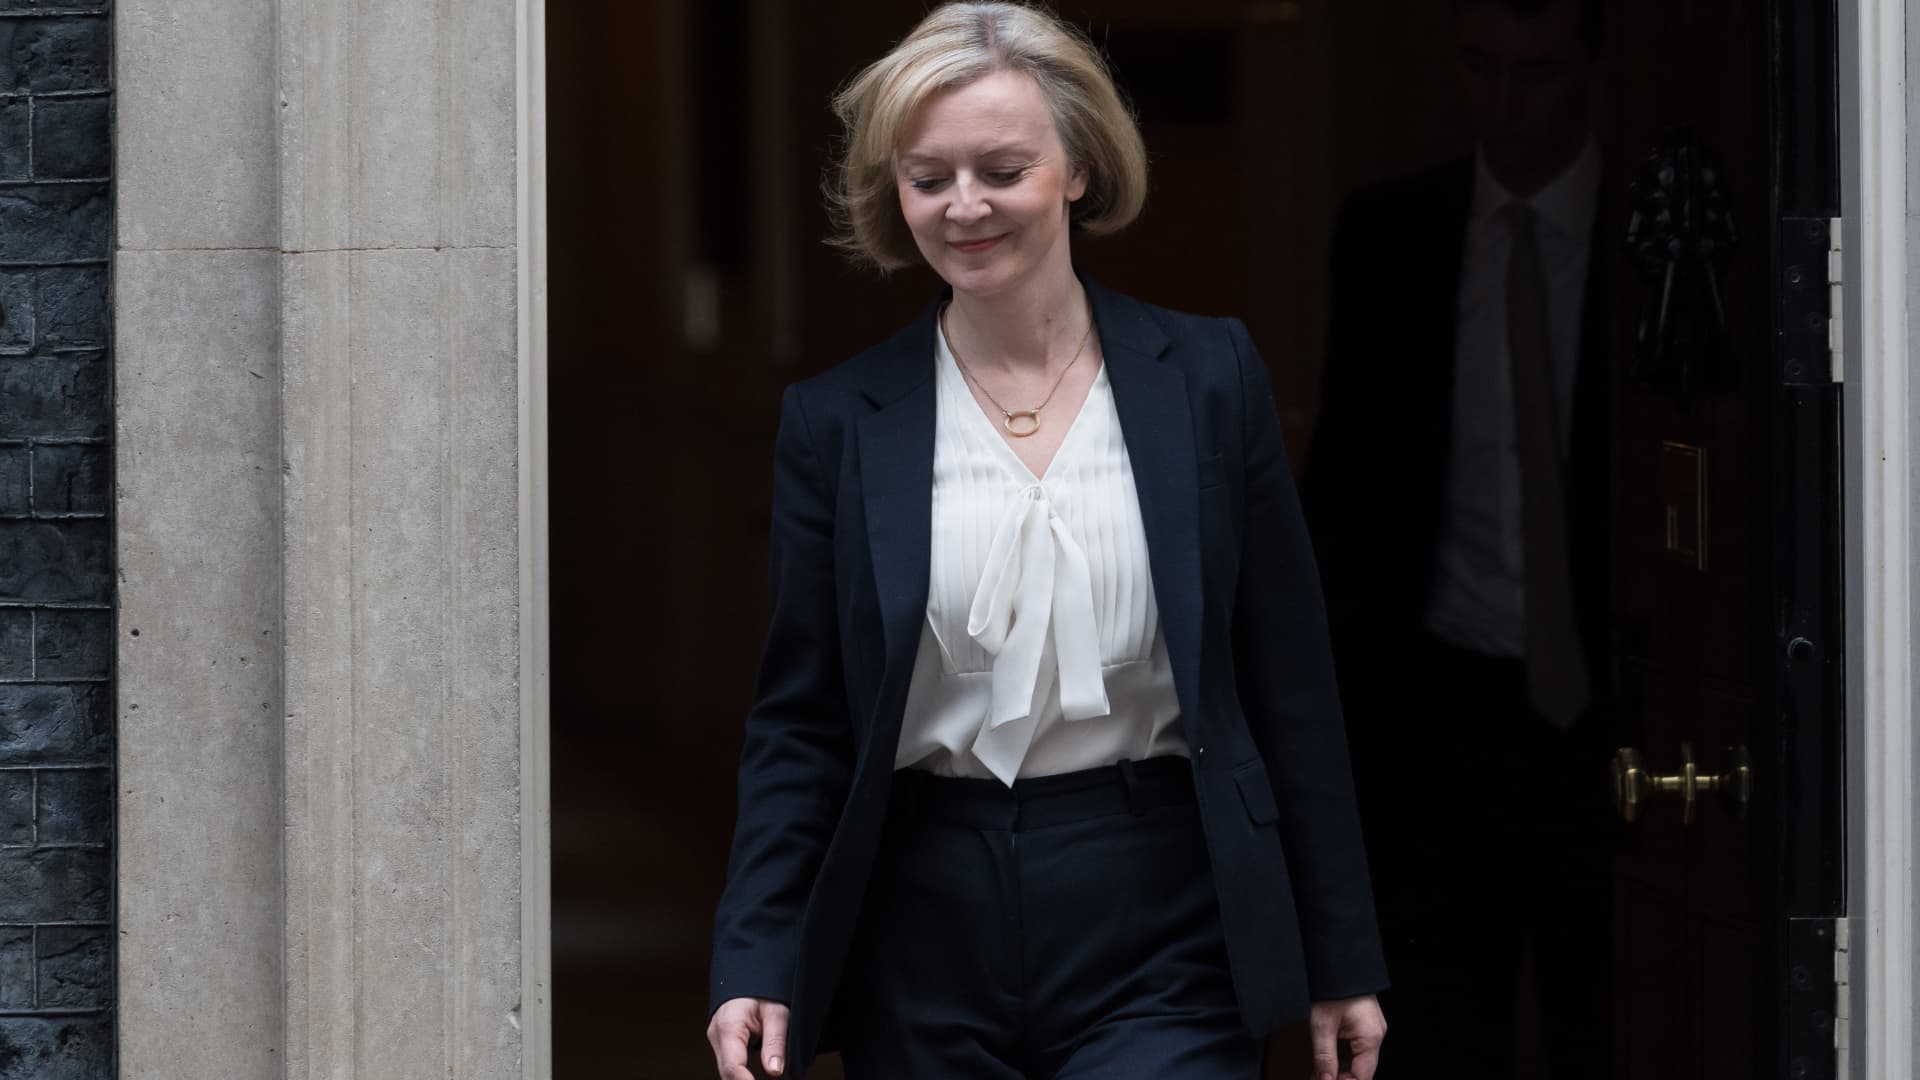 UK PM Liz Truss says she’s a ‘fighter not a quitter’ as lawmakers plot to oust her